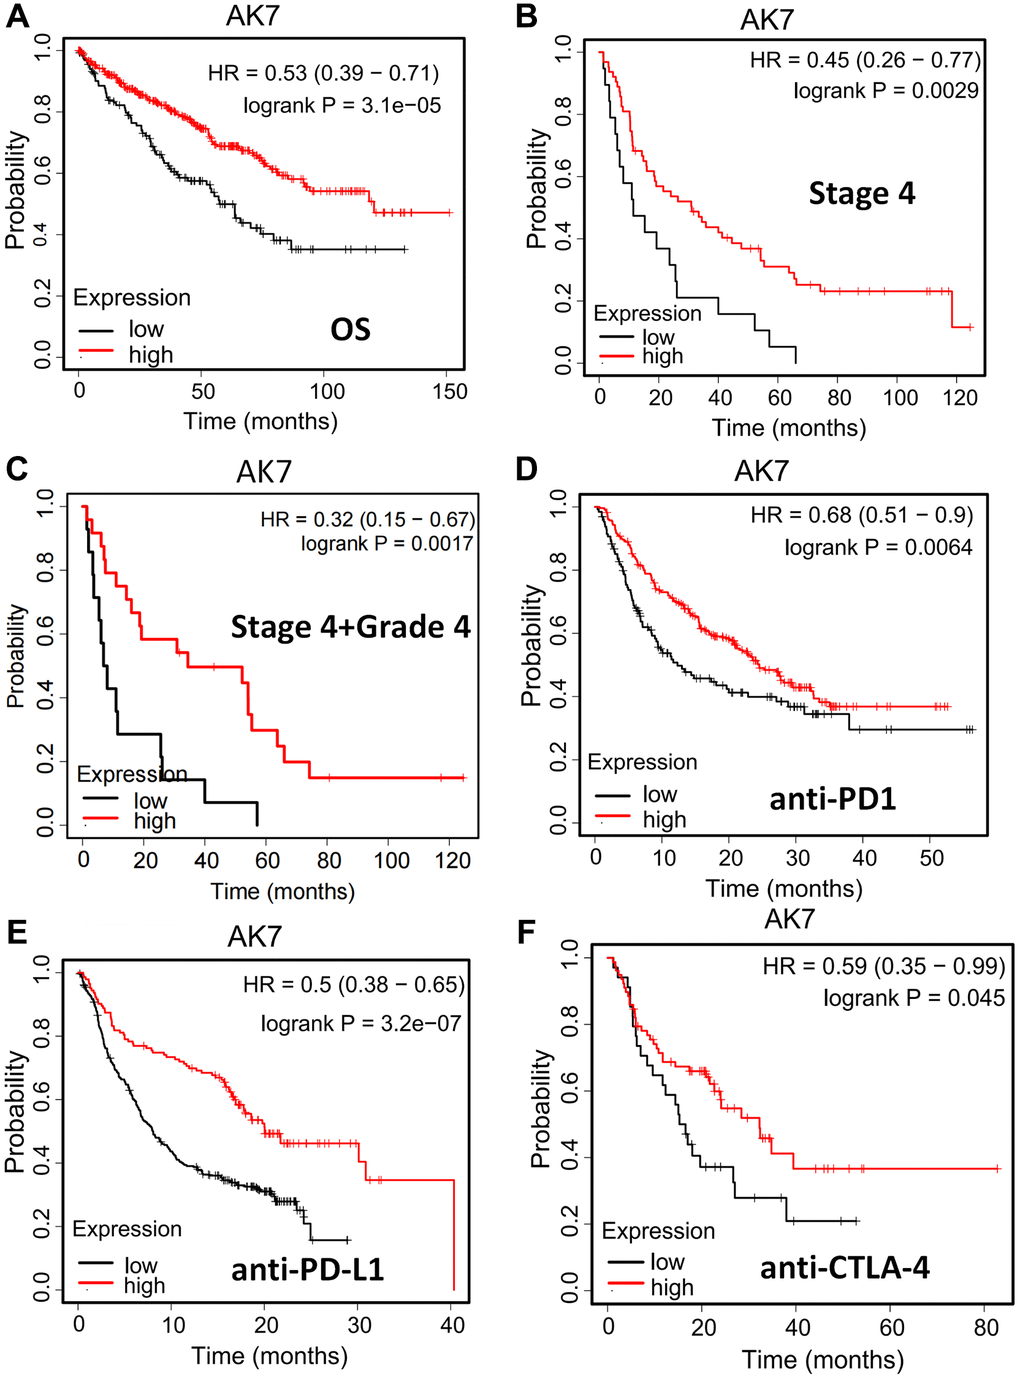 AK7 can be used as a prognostic indicator and a predictor of immunotherapy effect in ccRCC patients. (A) In pancarcinoma, patients with high expression of AK7 have a better prognosis than those with low expression. (B) In ccRCC, patients with high expression of AK7 had longer OS than those with low expression. (C) In ccRCC at stage 4, patients with high expression of AK7 had longer OS than those with low expression. (D–F) In patients treated with anti-PD1 (D), anti-PD-L1 (E), and anti-CTLA-4 (F), high expression of AK7 has a better prognosis. *P **P ***P ****P 